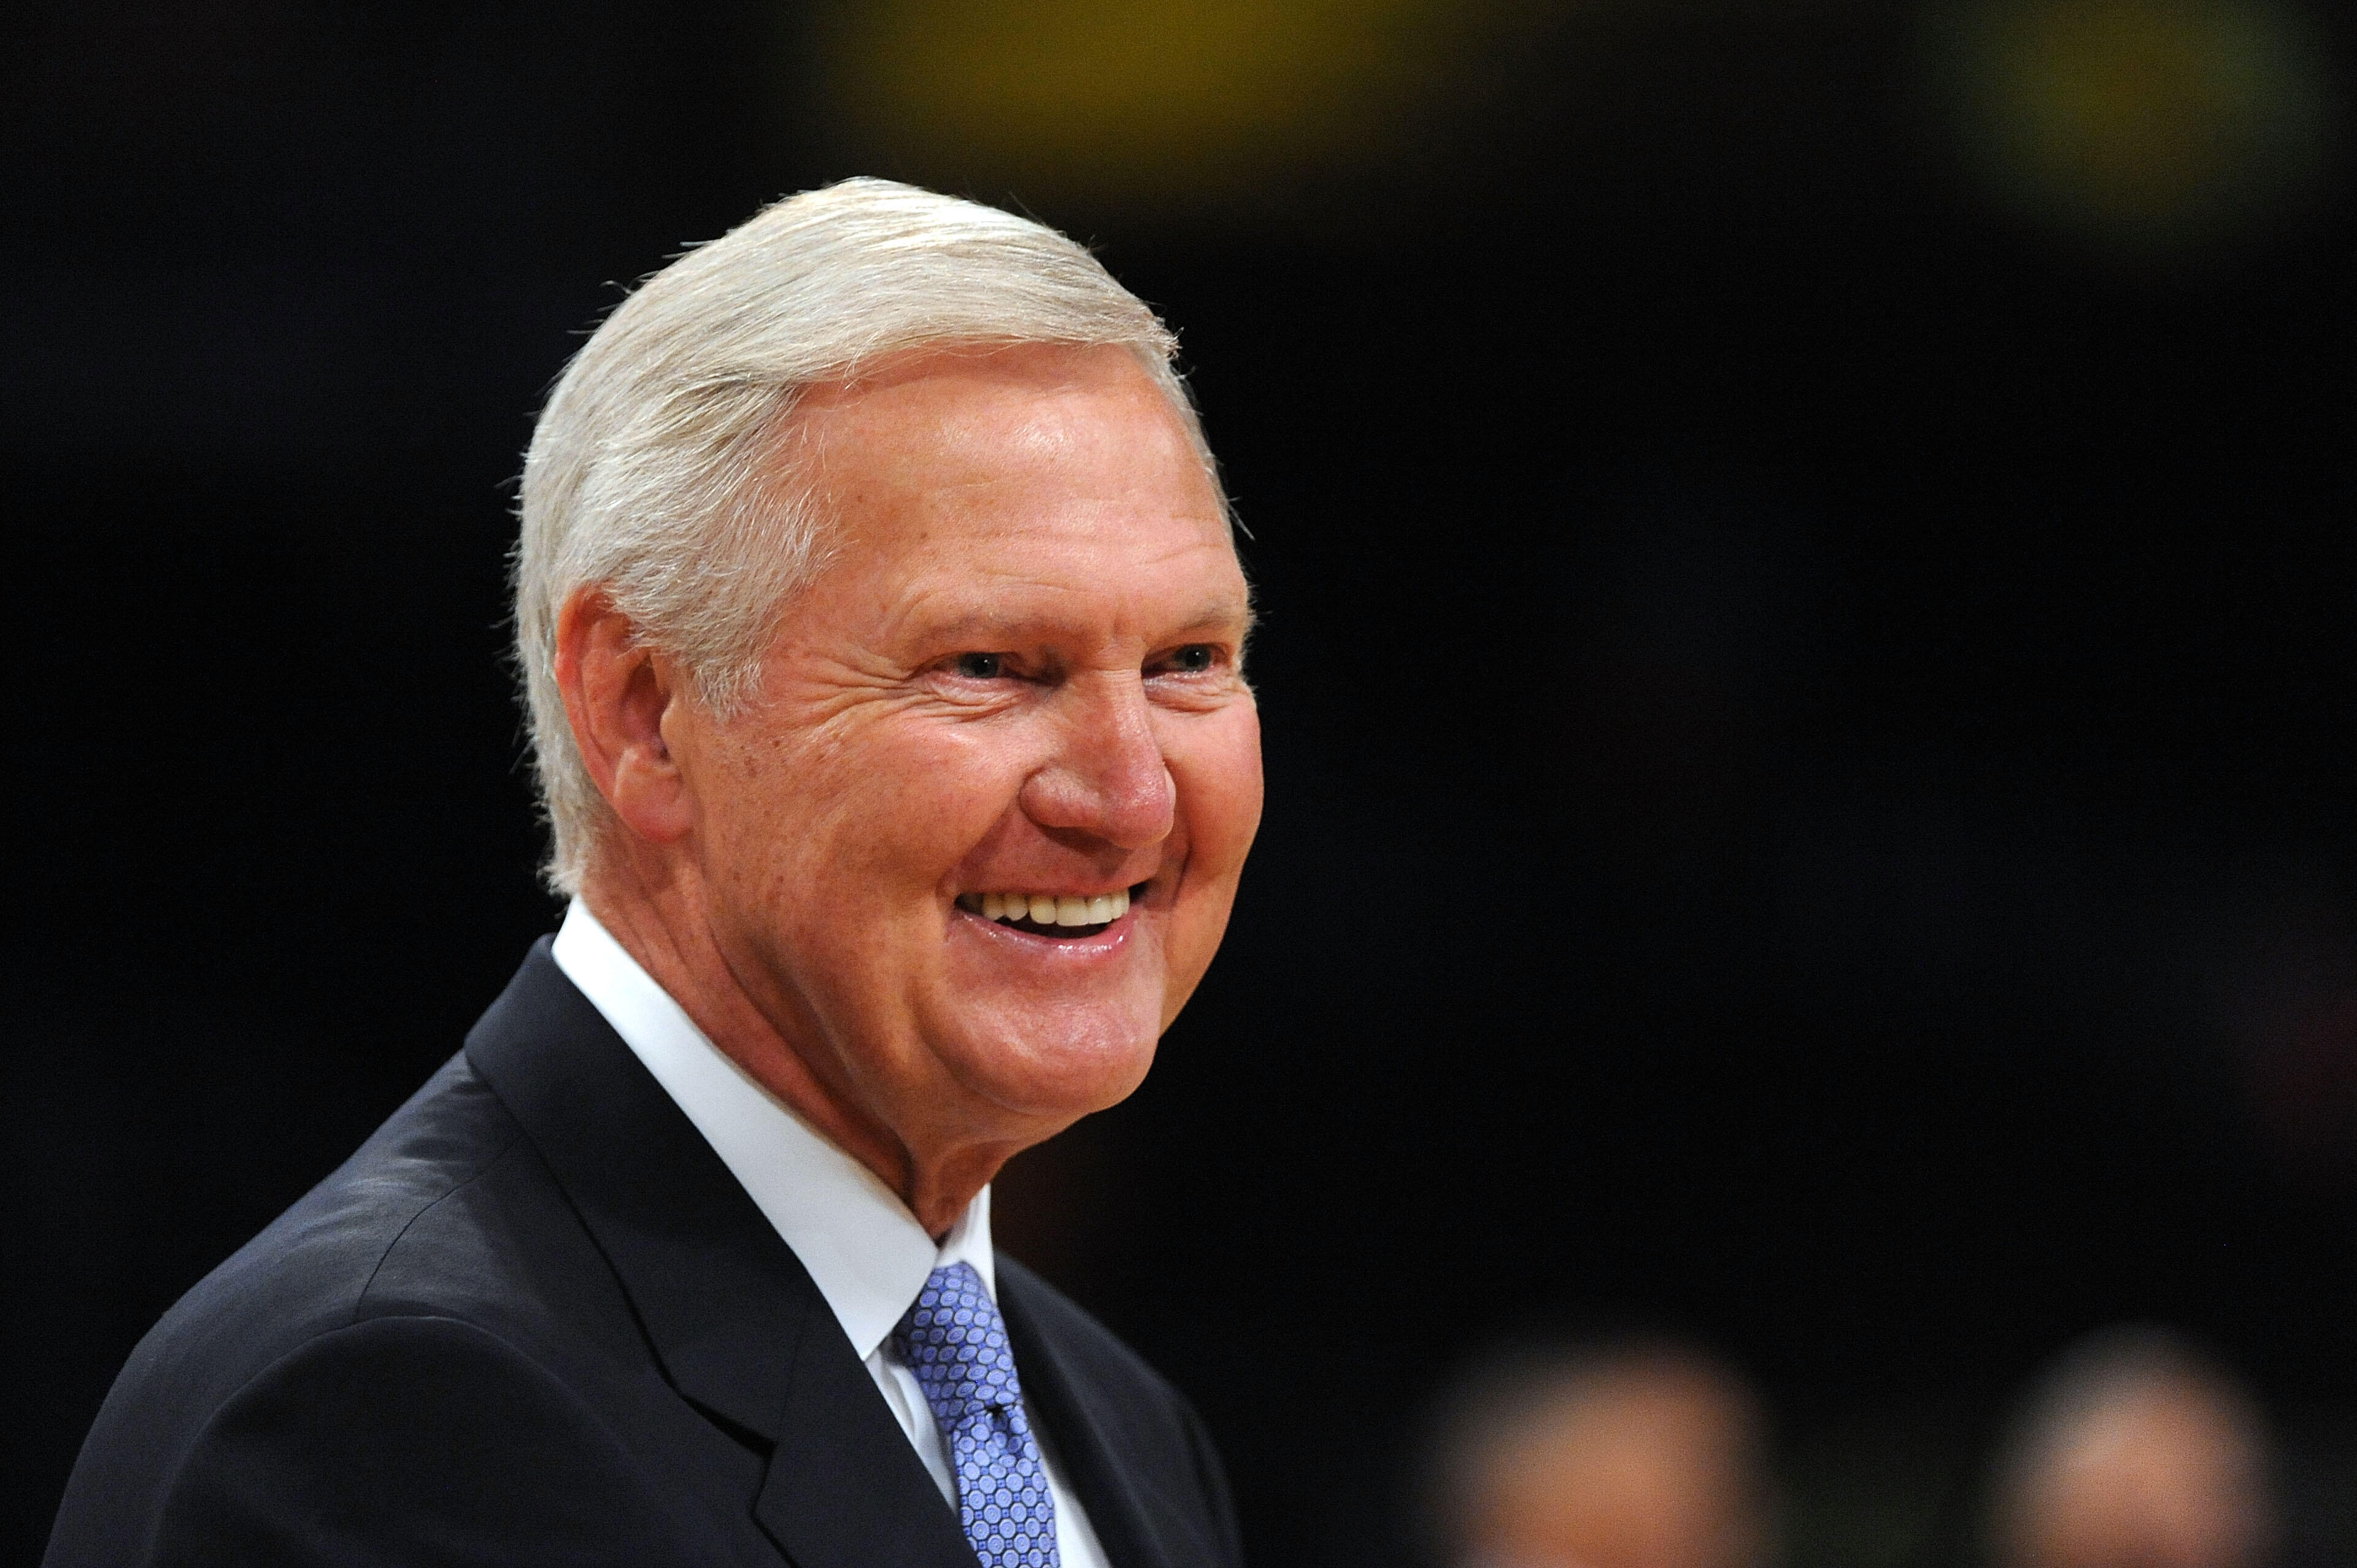 LOS ANGELES, CA - JUNE 03:  Former Lakers player and Genral Manager Jerry west looks on as the Boston Celtics play the Los Angeles Lakers in Game One of the 2010 NBA Finals at Staples Center on June 3, 2010 in Los Angeles, California.  NOTE TO USER: User 